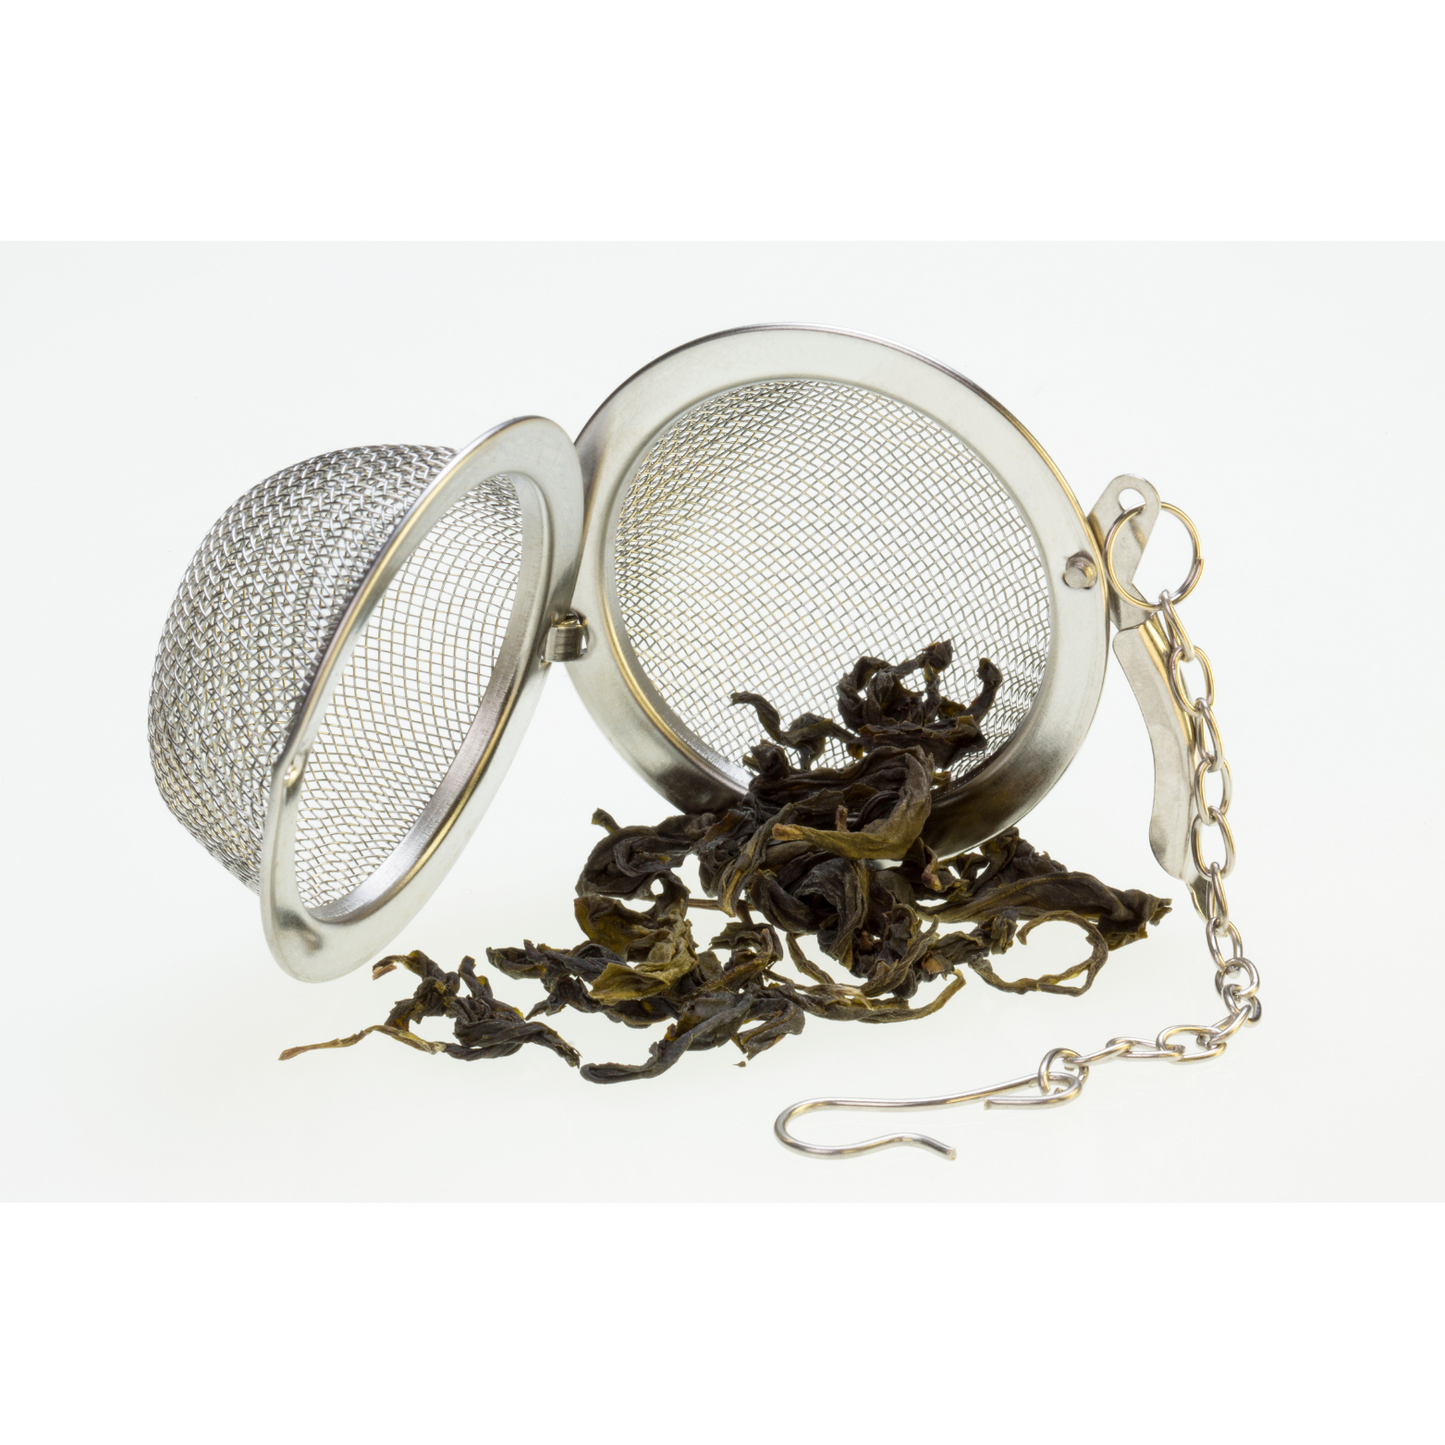 Tea Infuser Mesh Ball for Brewing Loose Leaf Tea 1.5" with FREE Wooden Spoon!